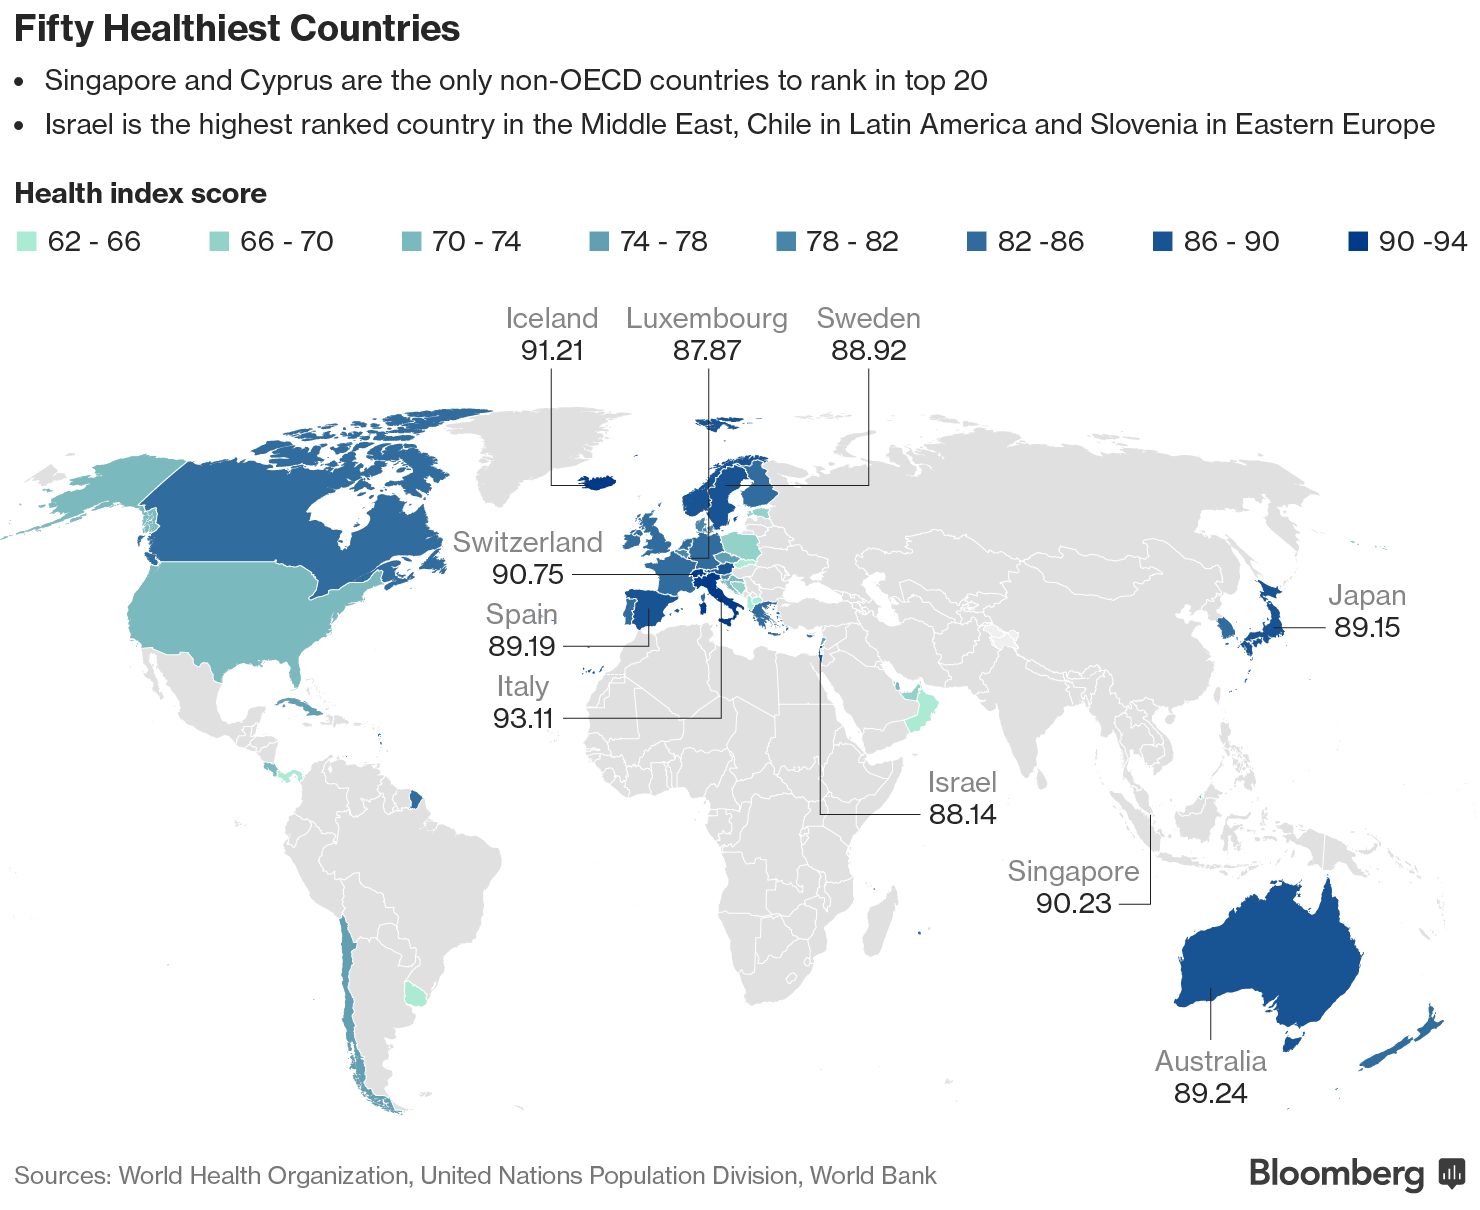 An image of the global bloomberg health index showing the most healthiest countries in the world.